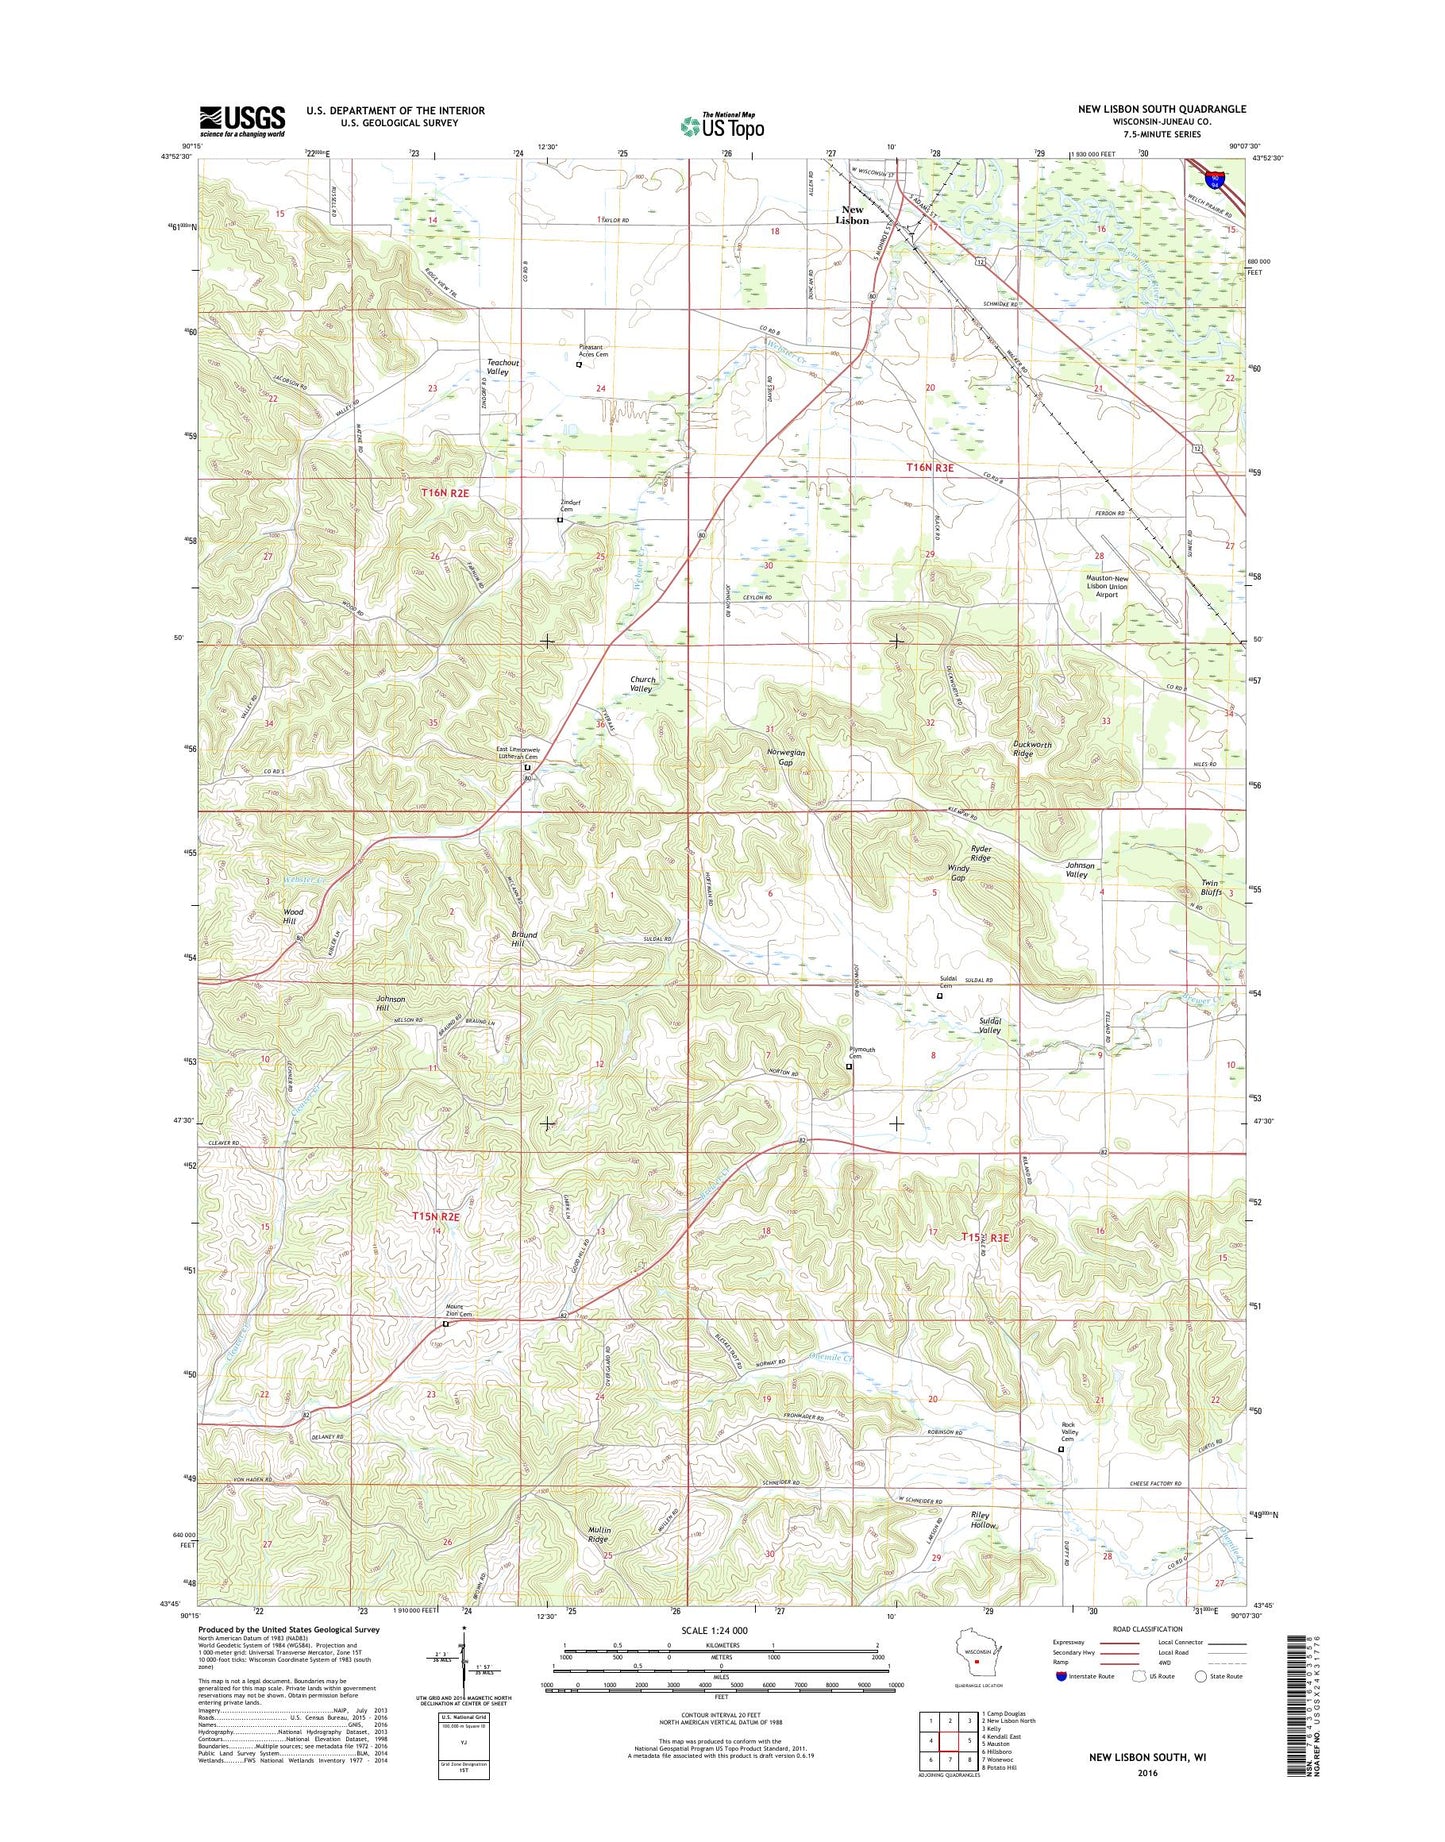 New Lisbon South Wisconsin US Topo Map Image